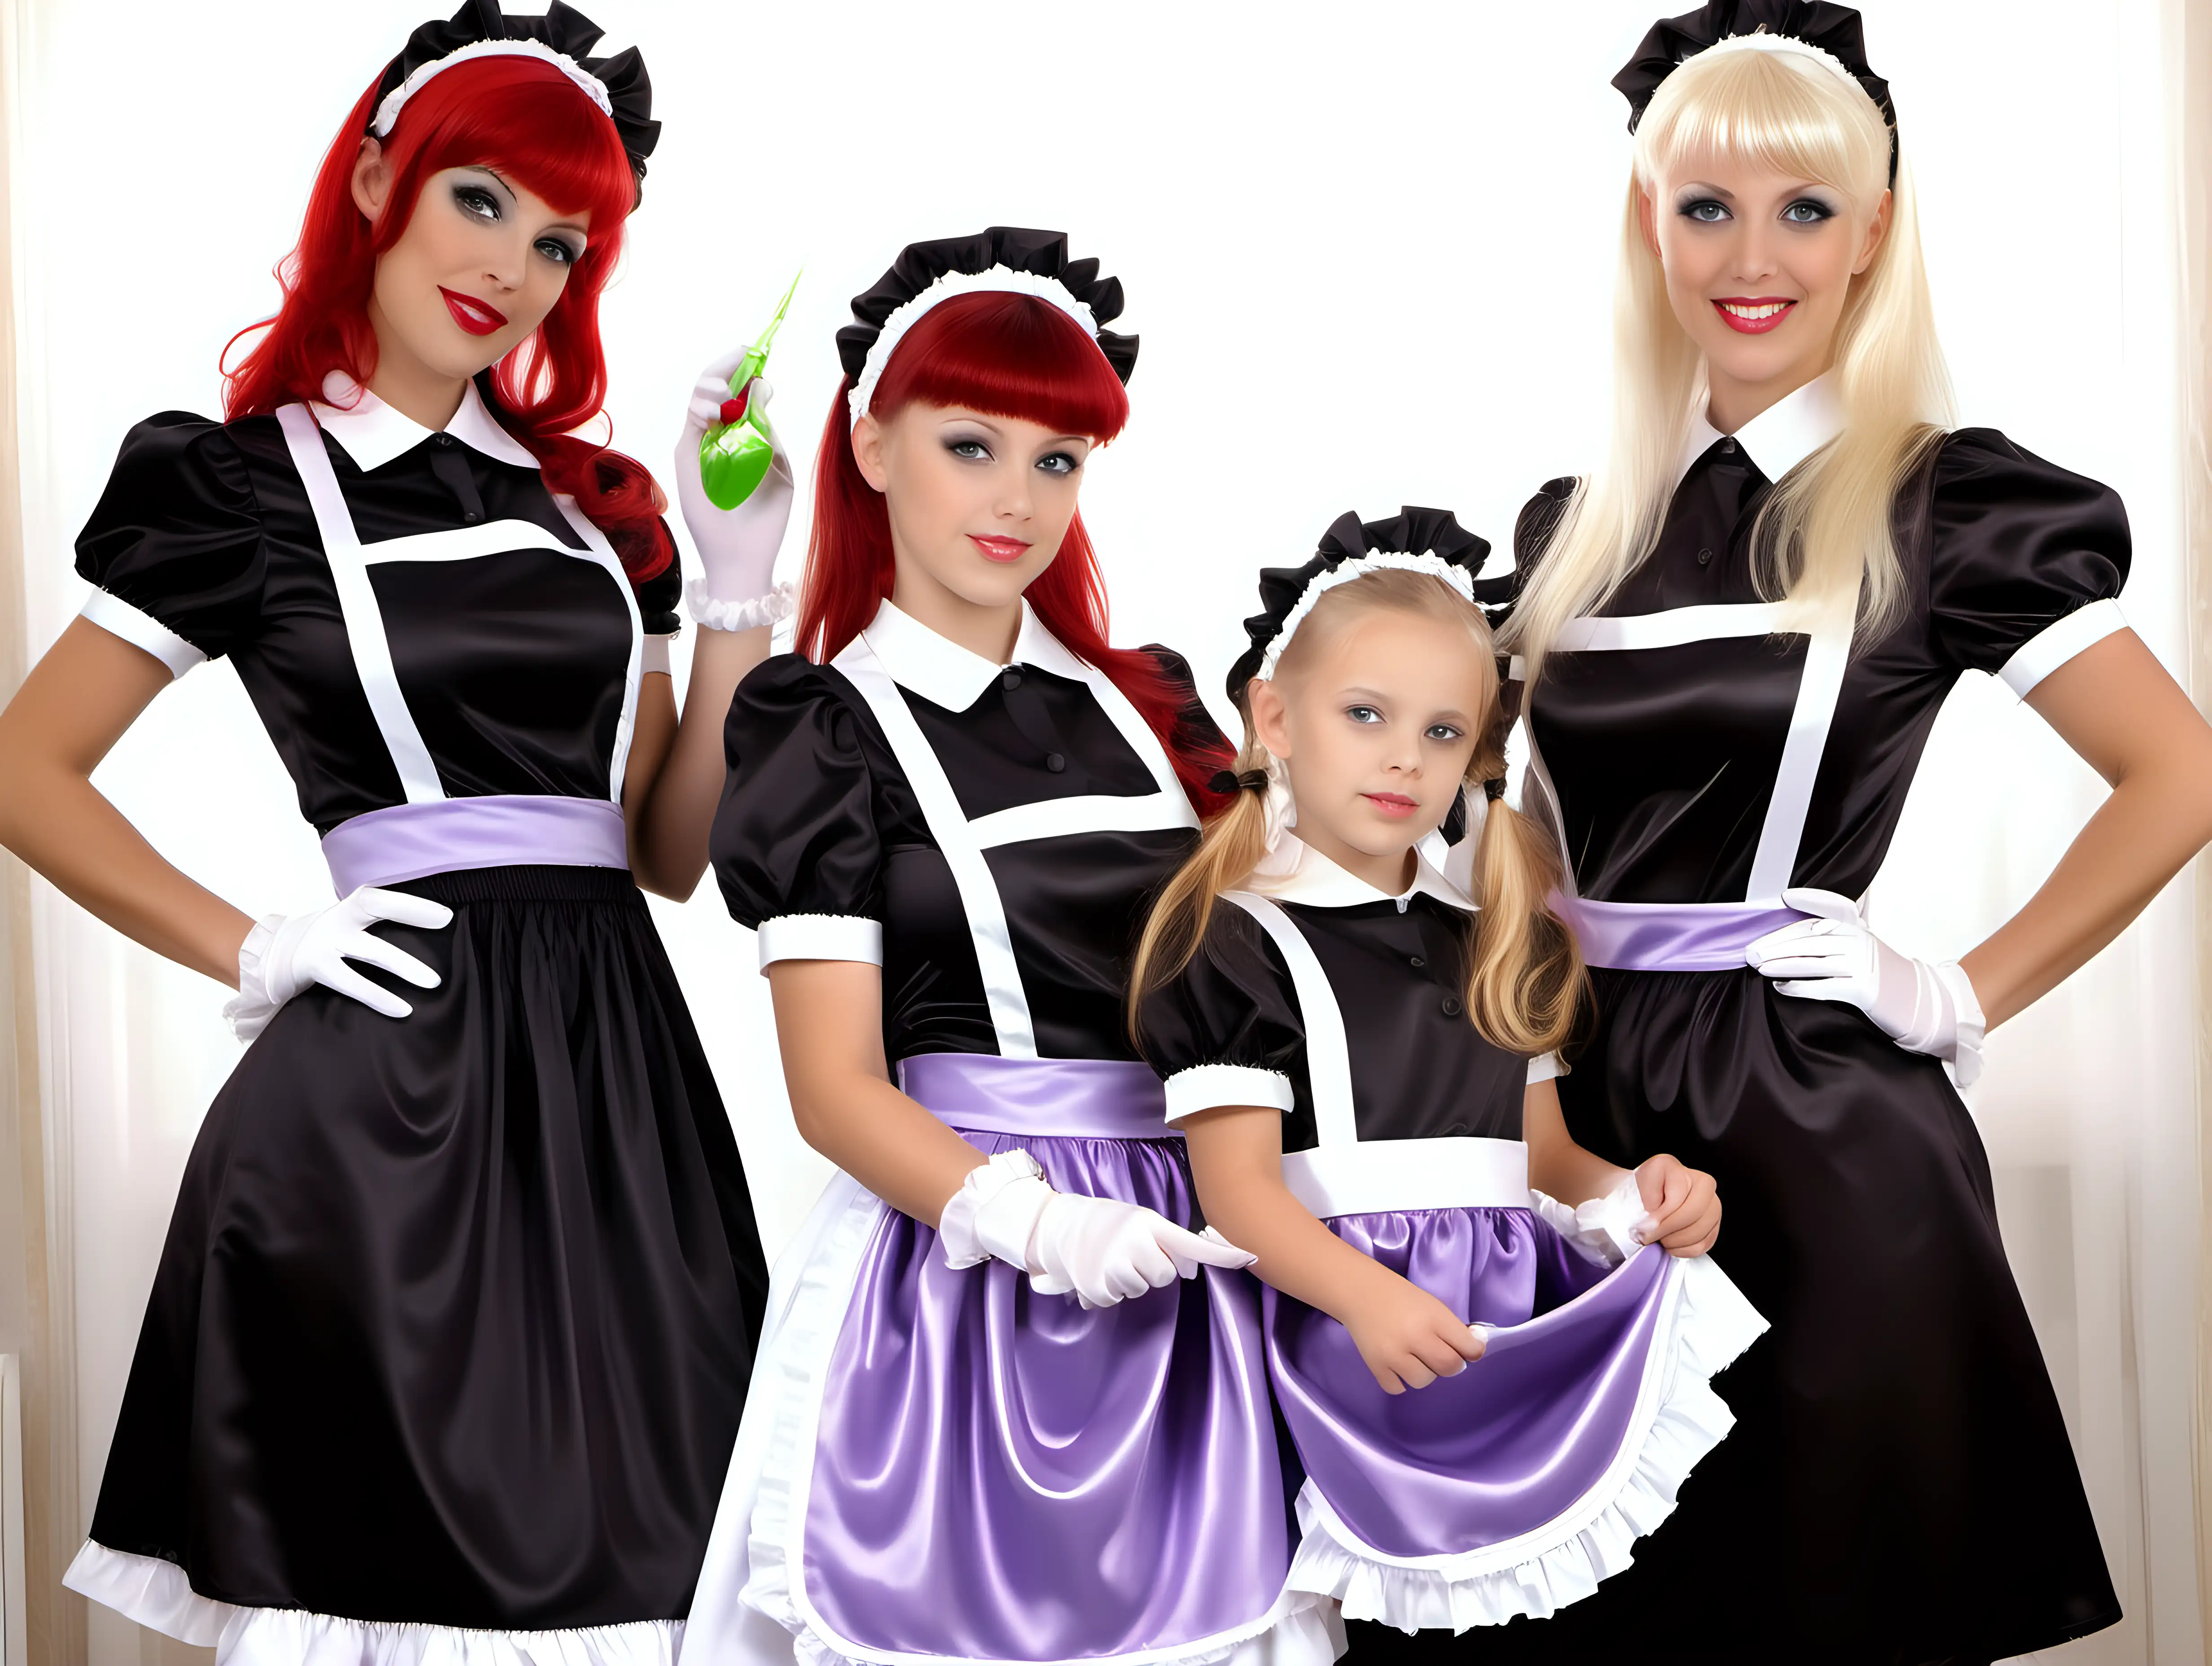 Charming Retro Maidthemed Family Portrait with Long Blonde and Red Hair